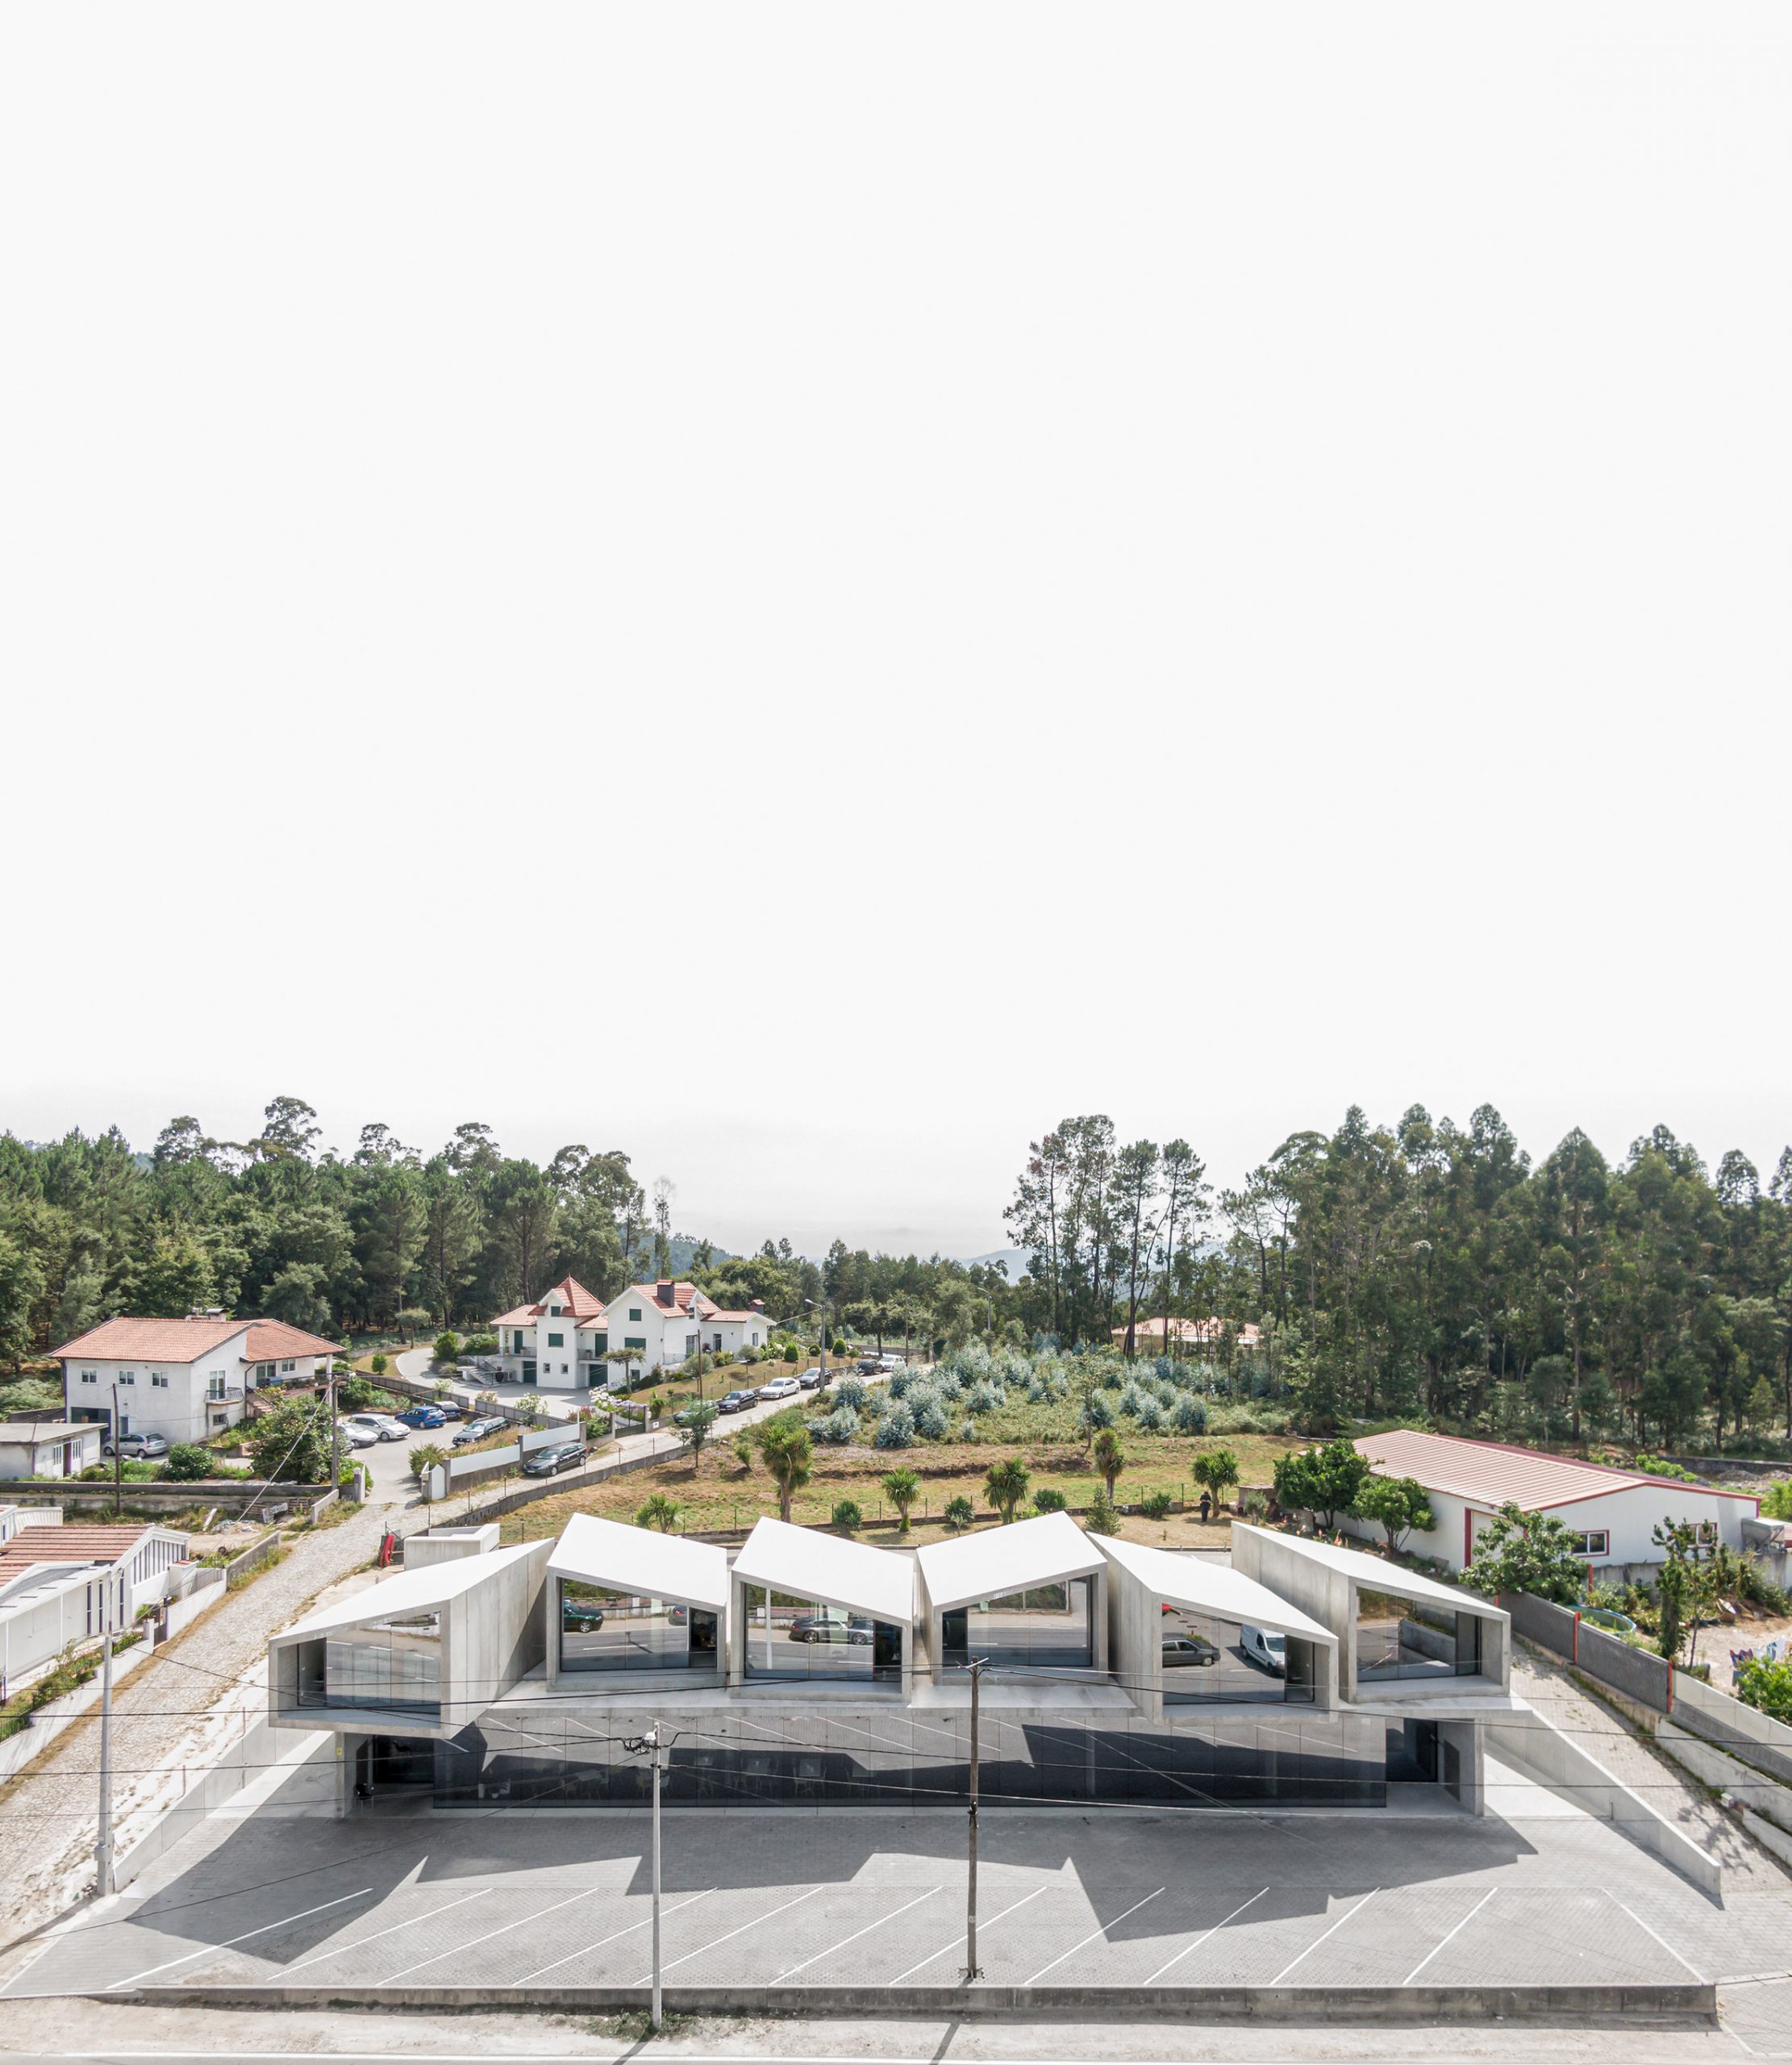 Houses and mixed-use combine to make VDC modular prefabricated concrete housing by Summary in Portugal